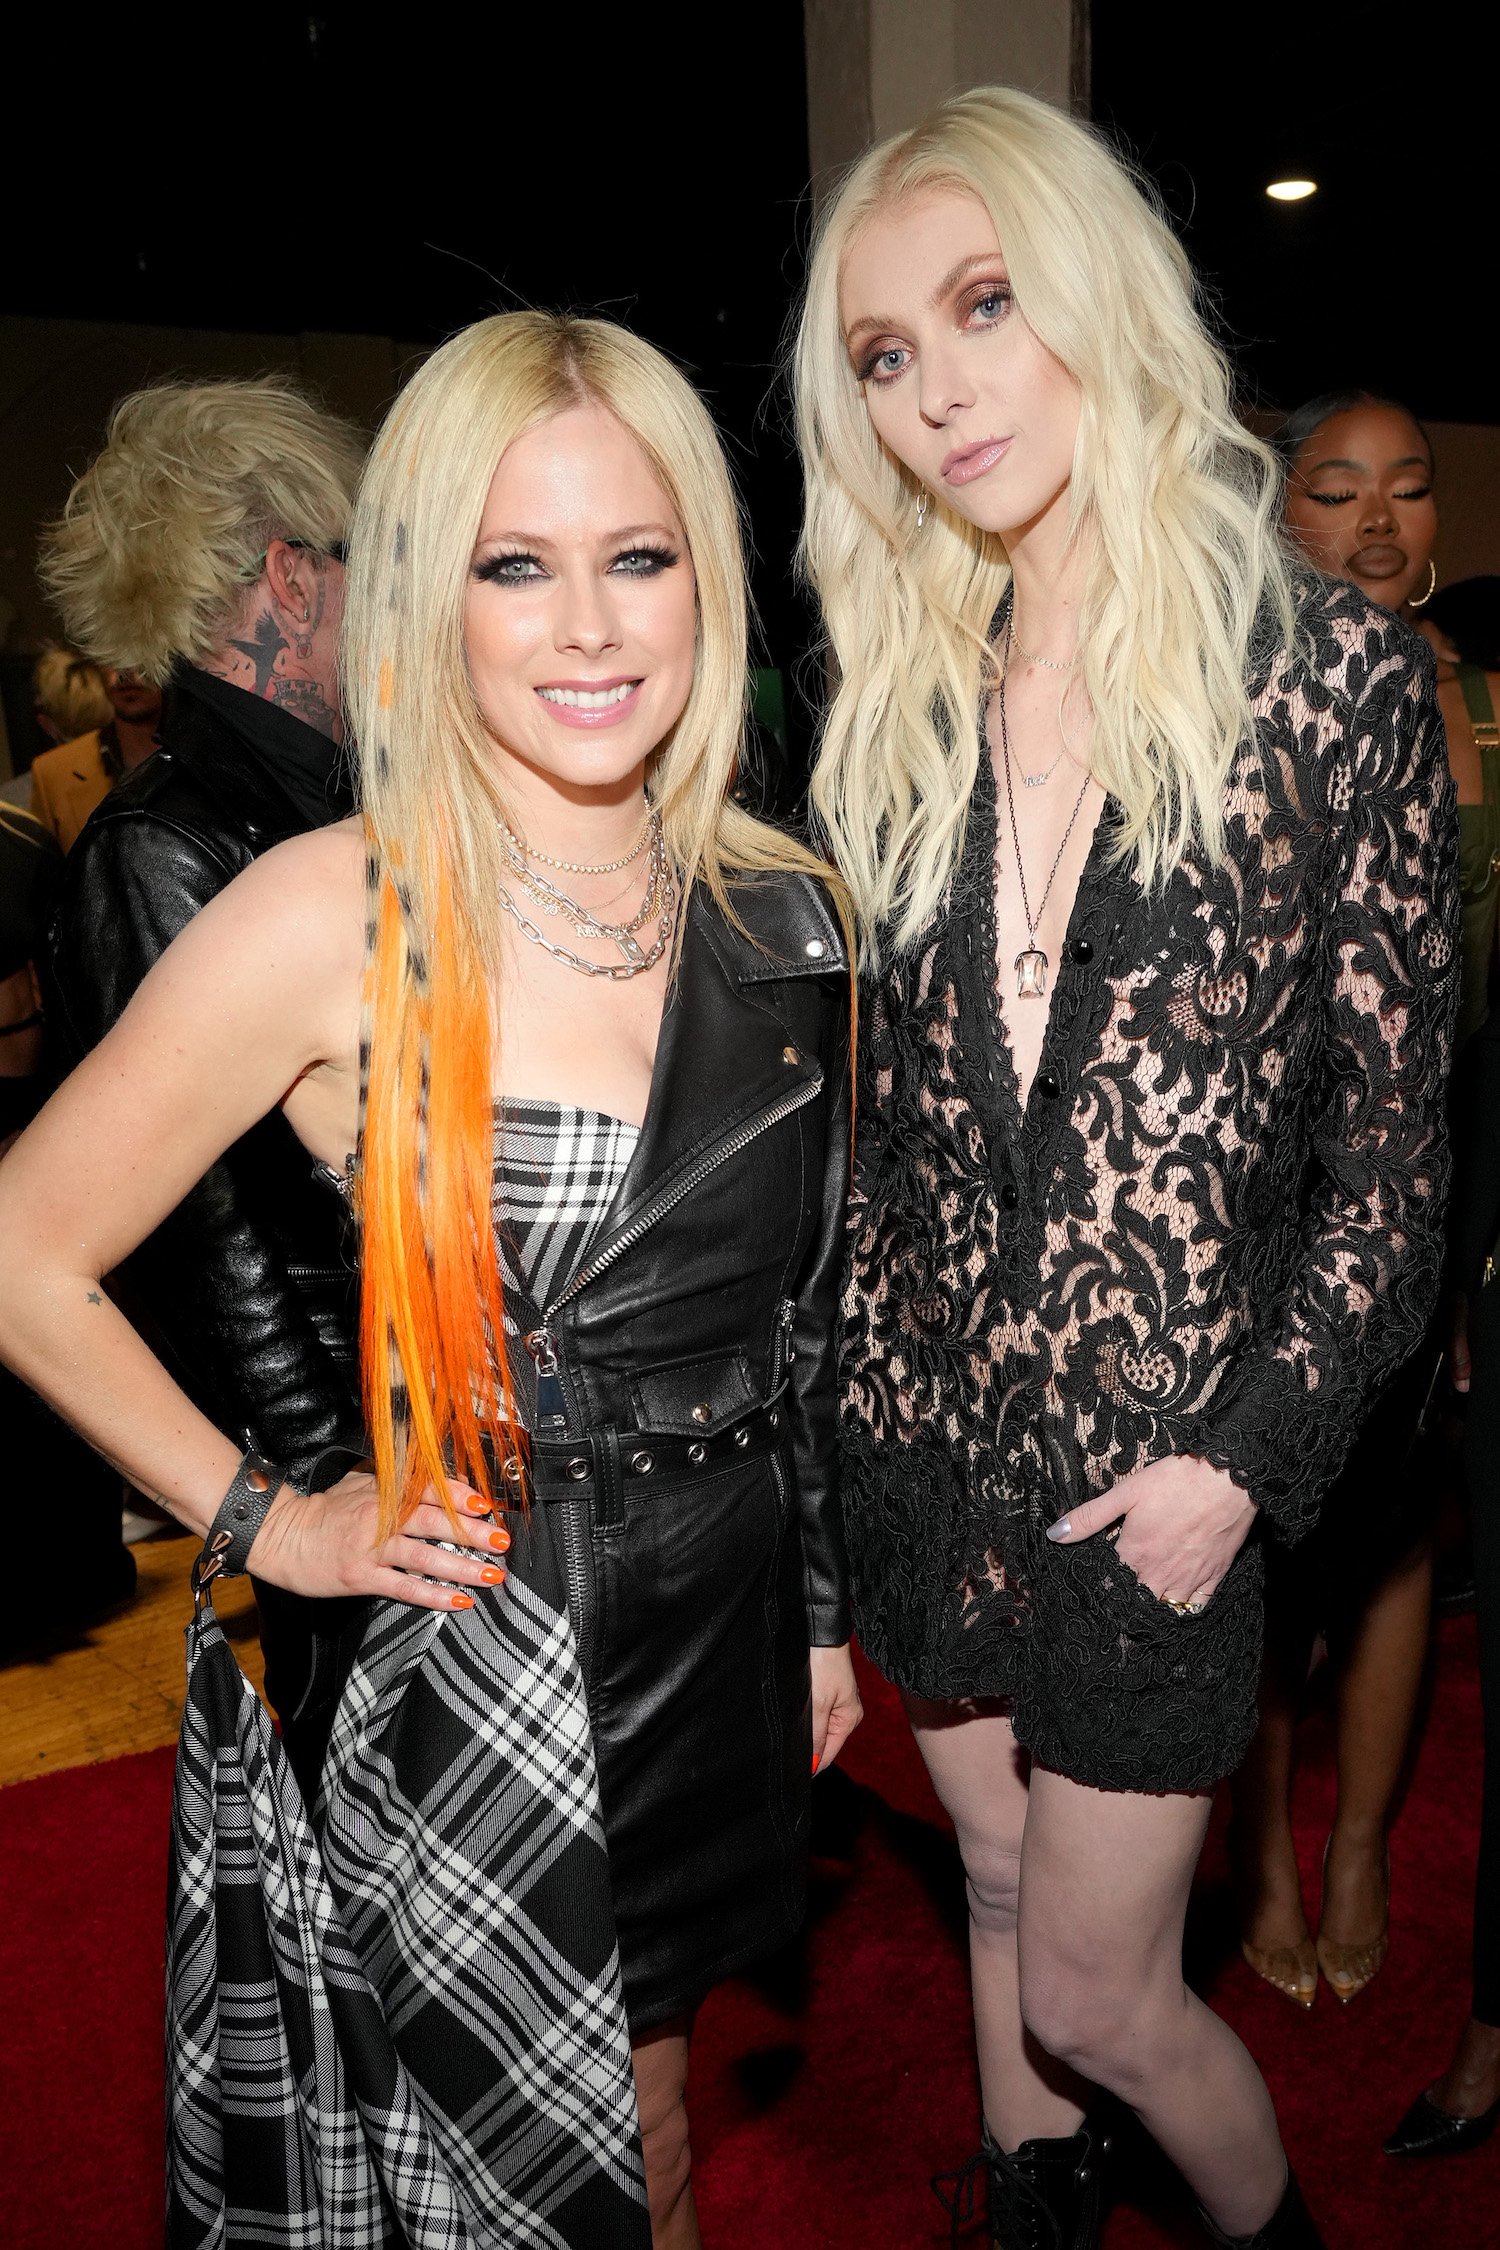 Avril Lavigne and Taylor Momsen attend the 2022 iHeartRadio Music Awards